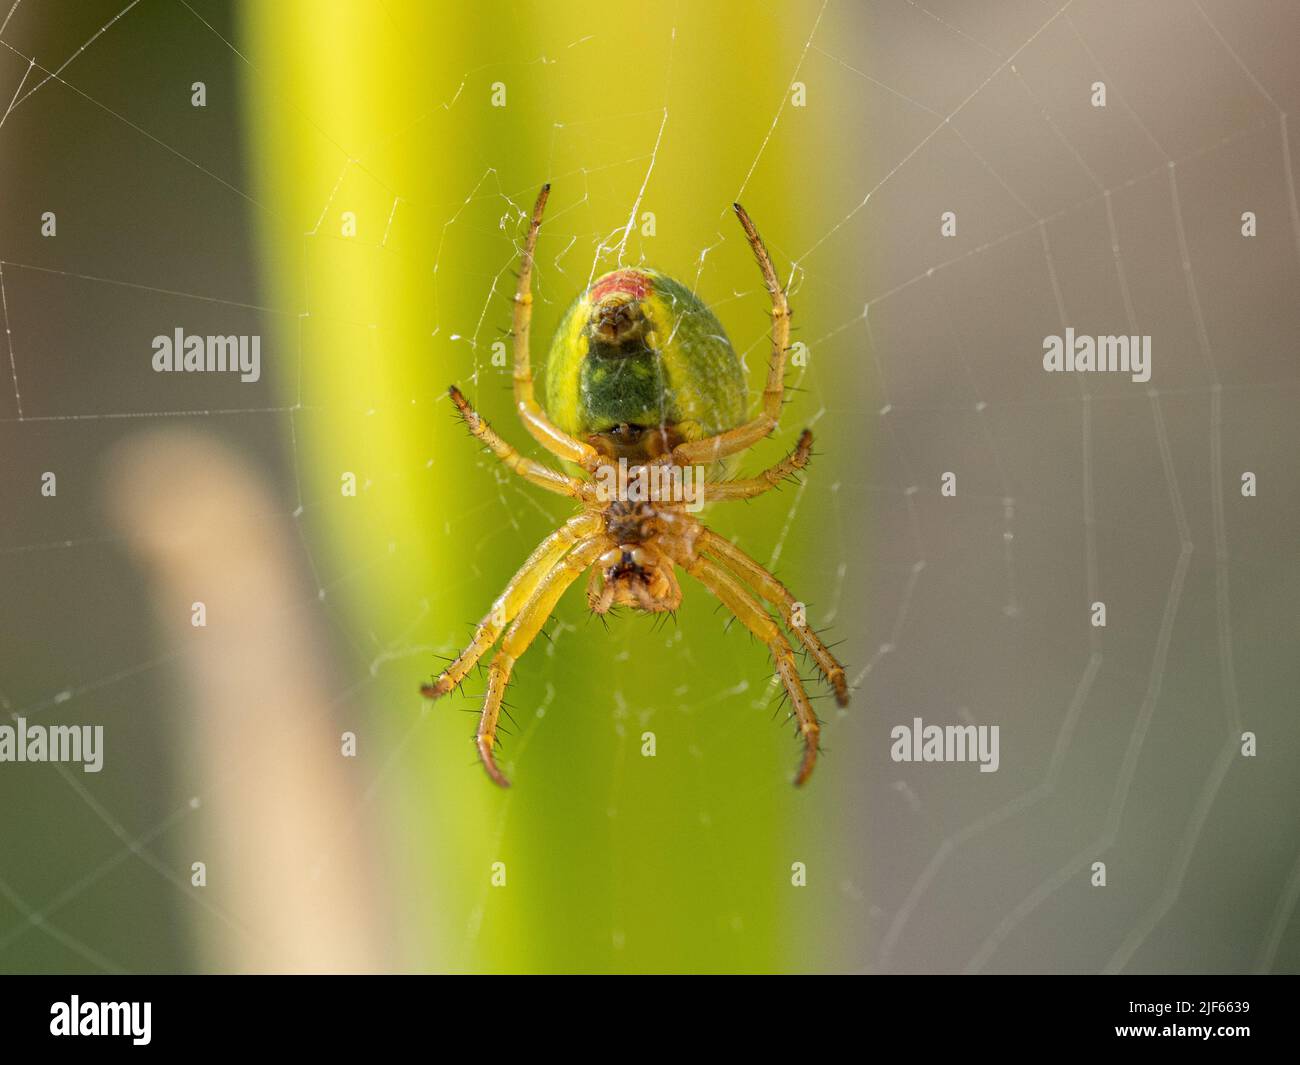 A close up of the underside of a cucumber Green spider - Araniella cucurbitina hanging in the centre of its web Stock Photo